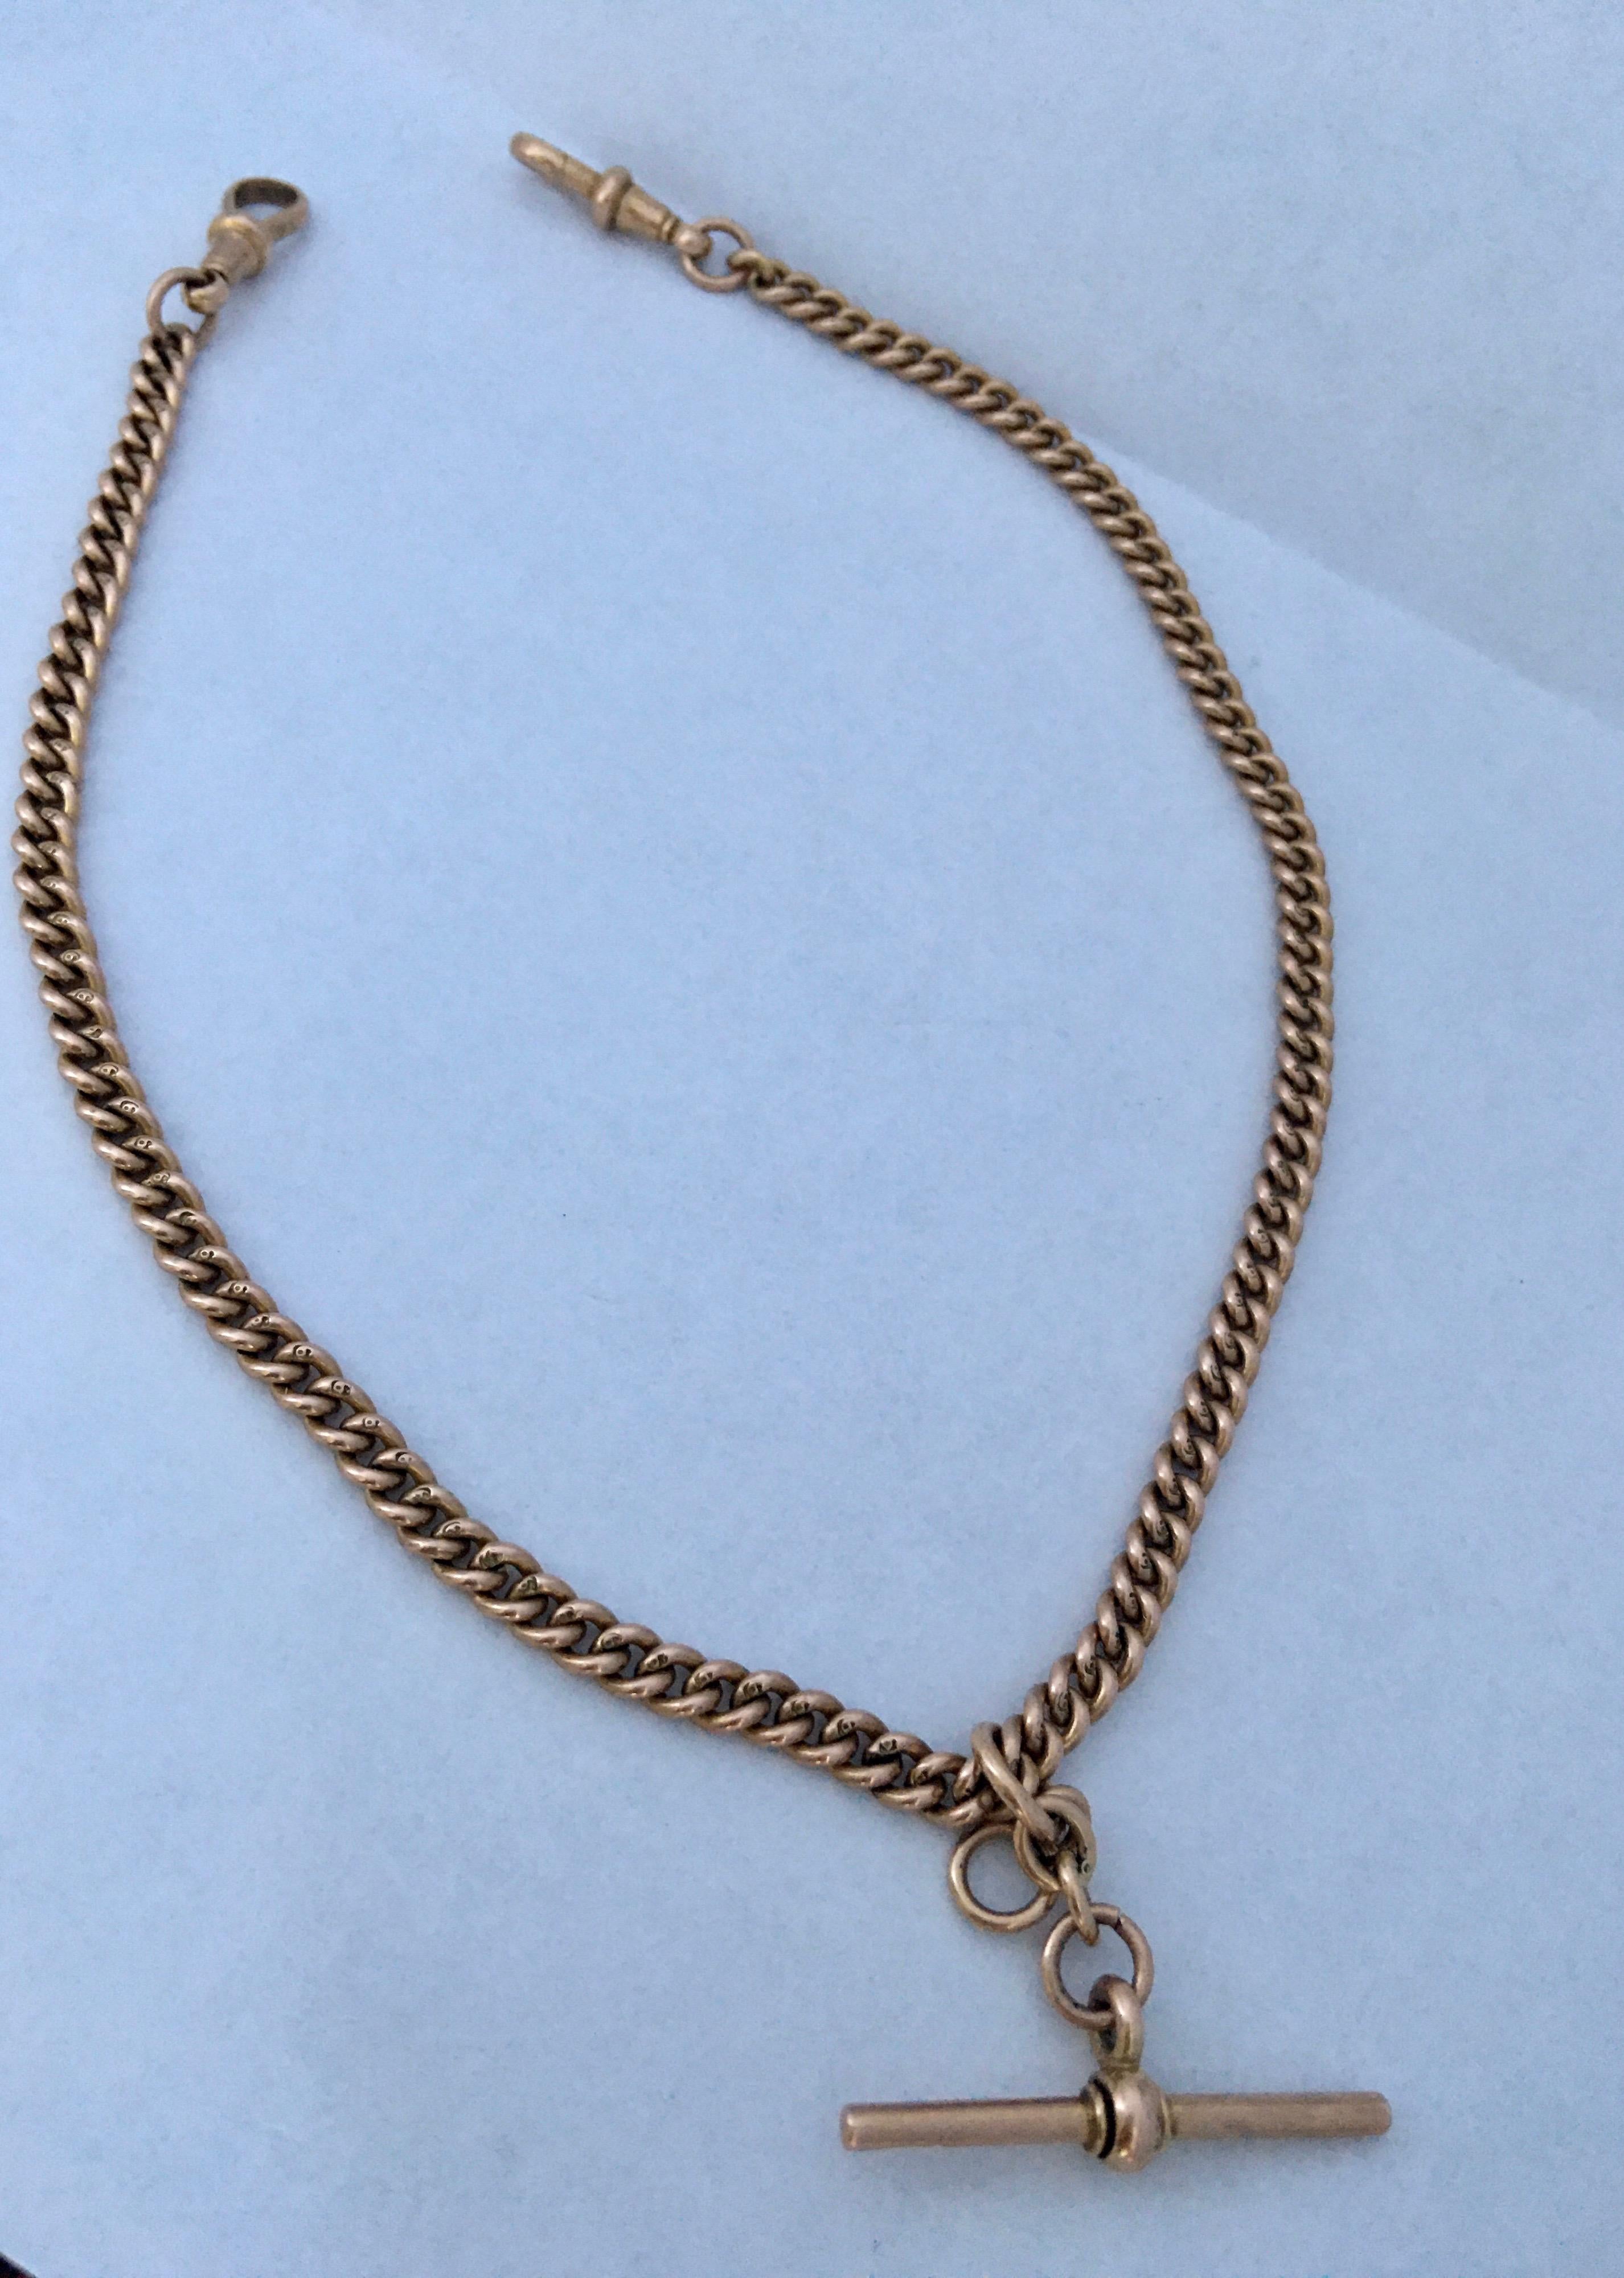 This Gold Albert pocket chain measures 13.2 inches length and 22 grams weight. And stamped 9K on each link as shown.

Please study the images carefully as form part of the description.